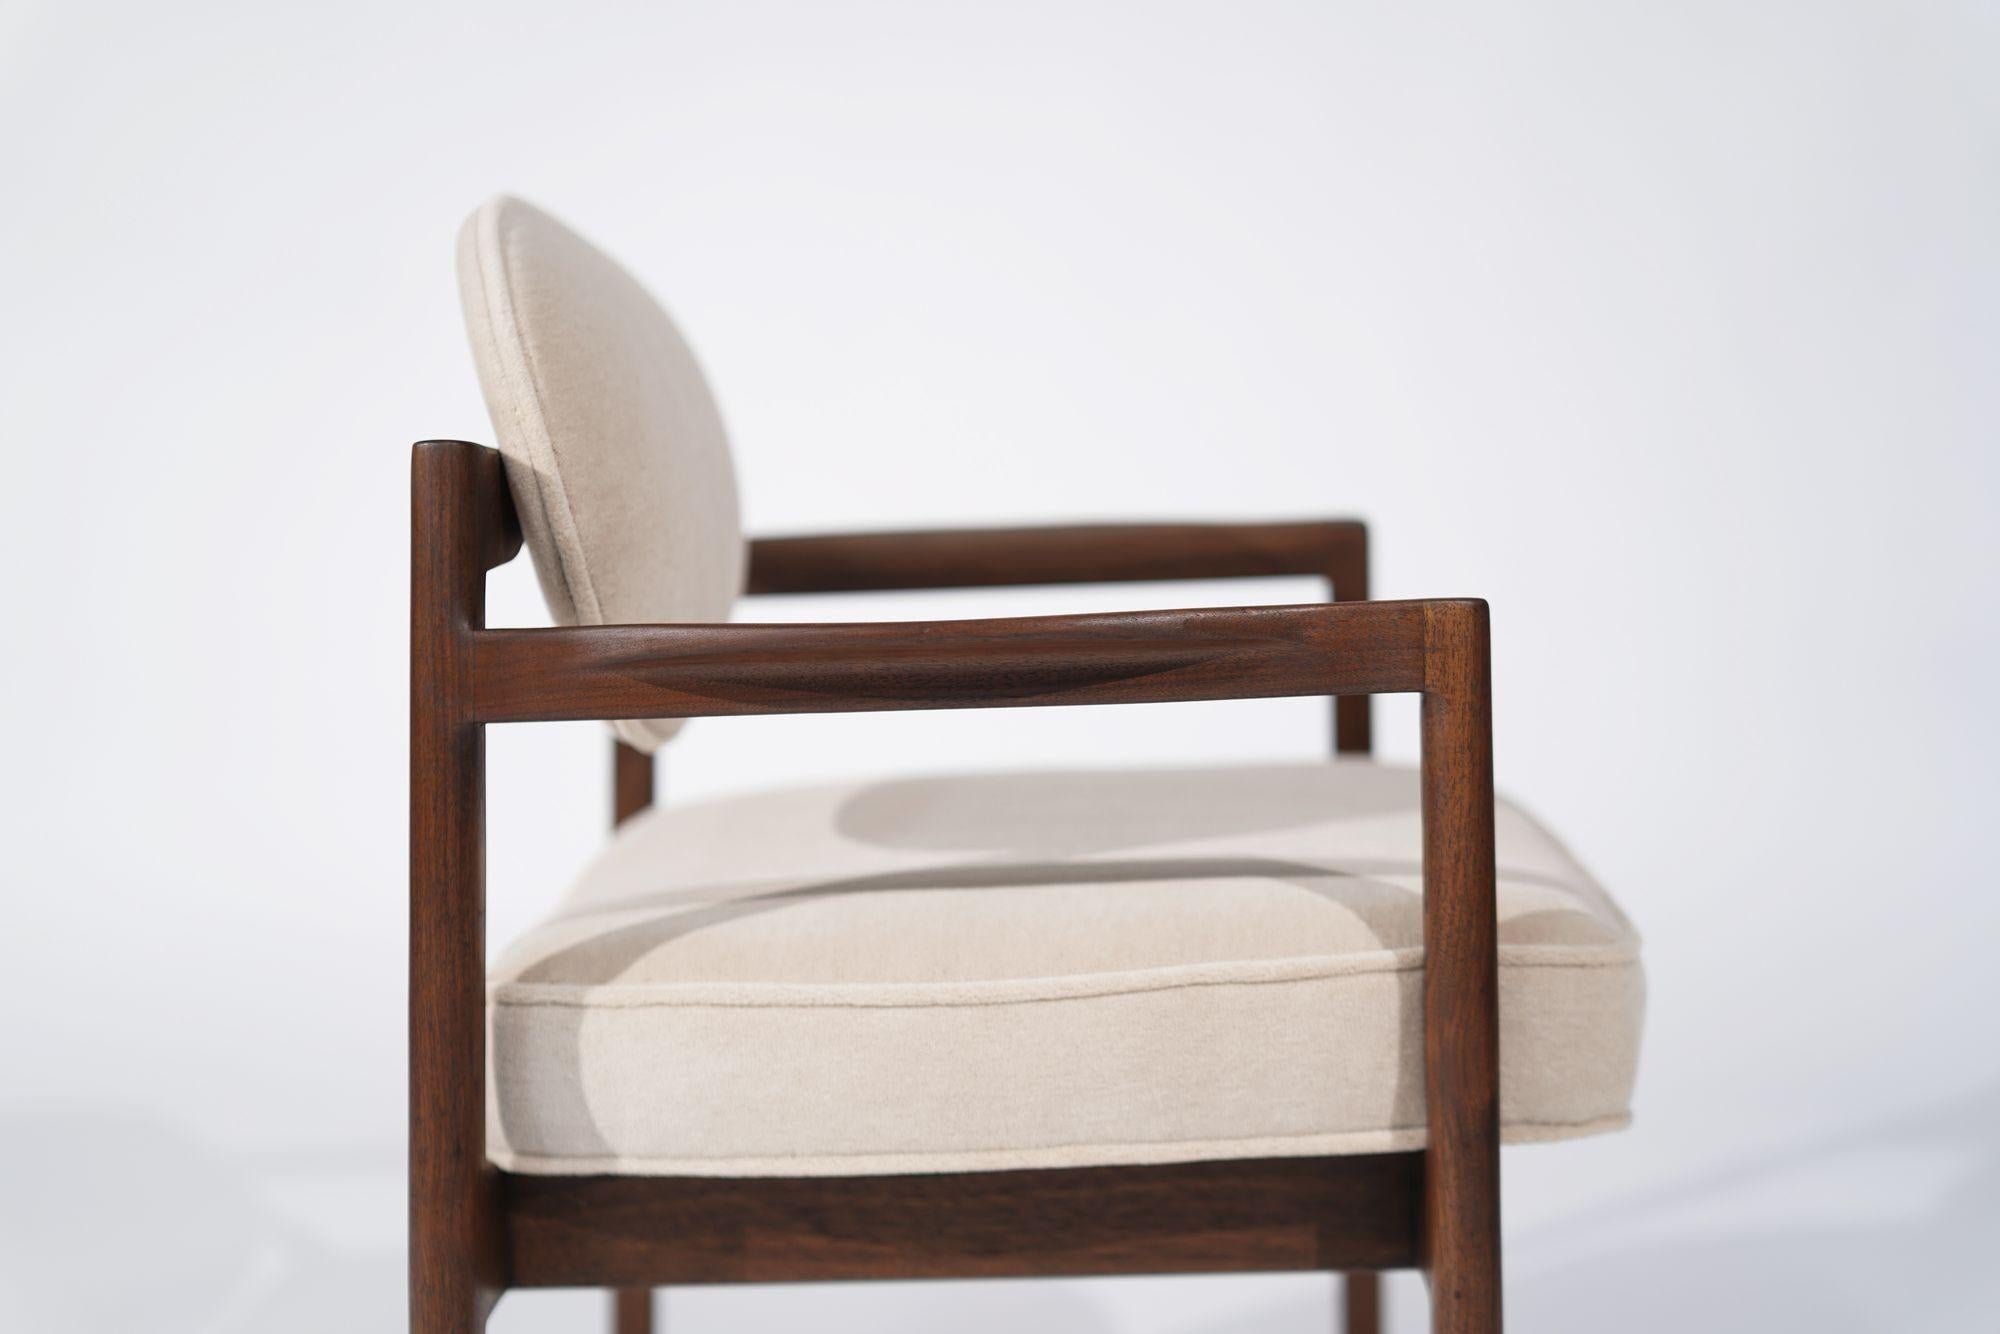 Jens Risom Walnut Armchairs in Natural Mohair, C. 1950s For Sale 1